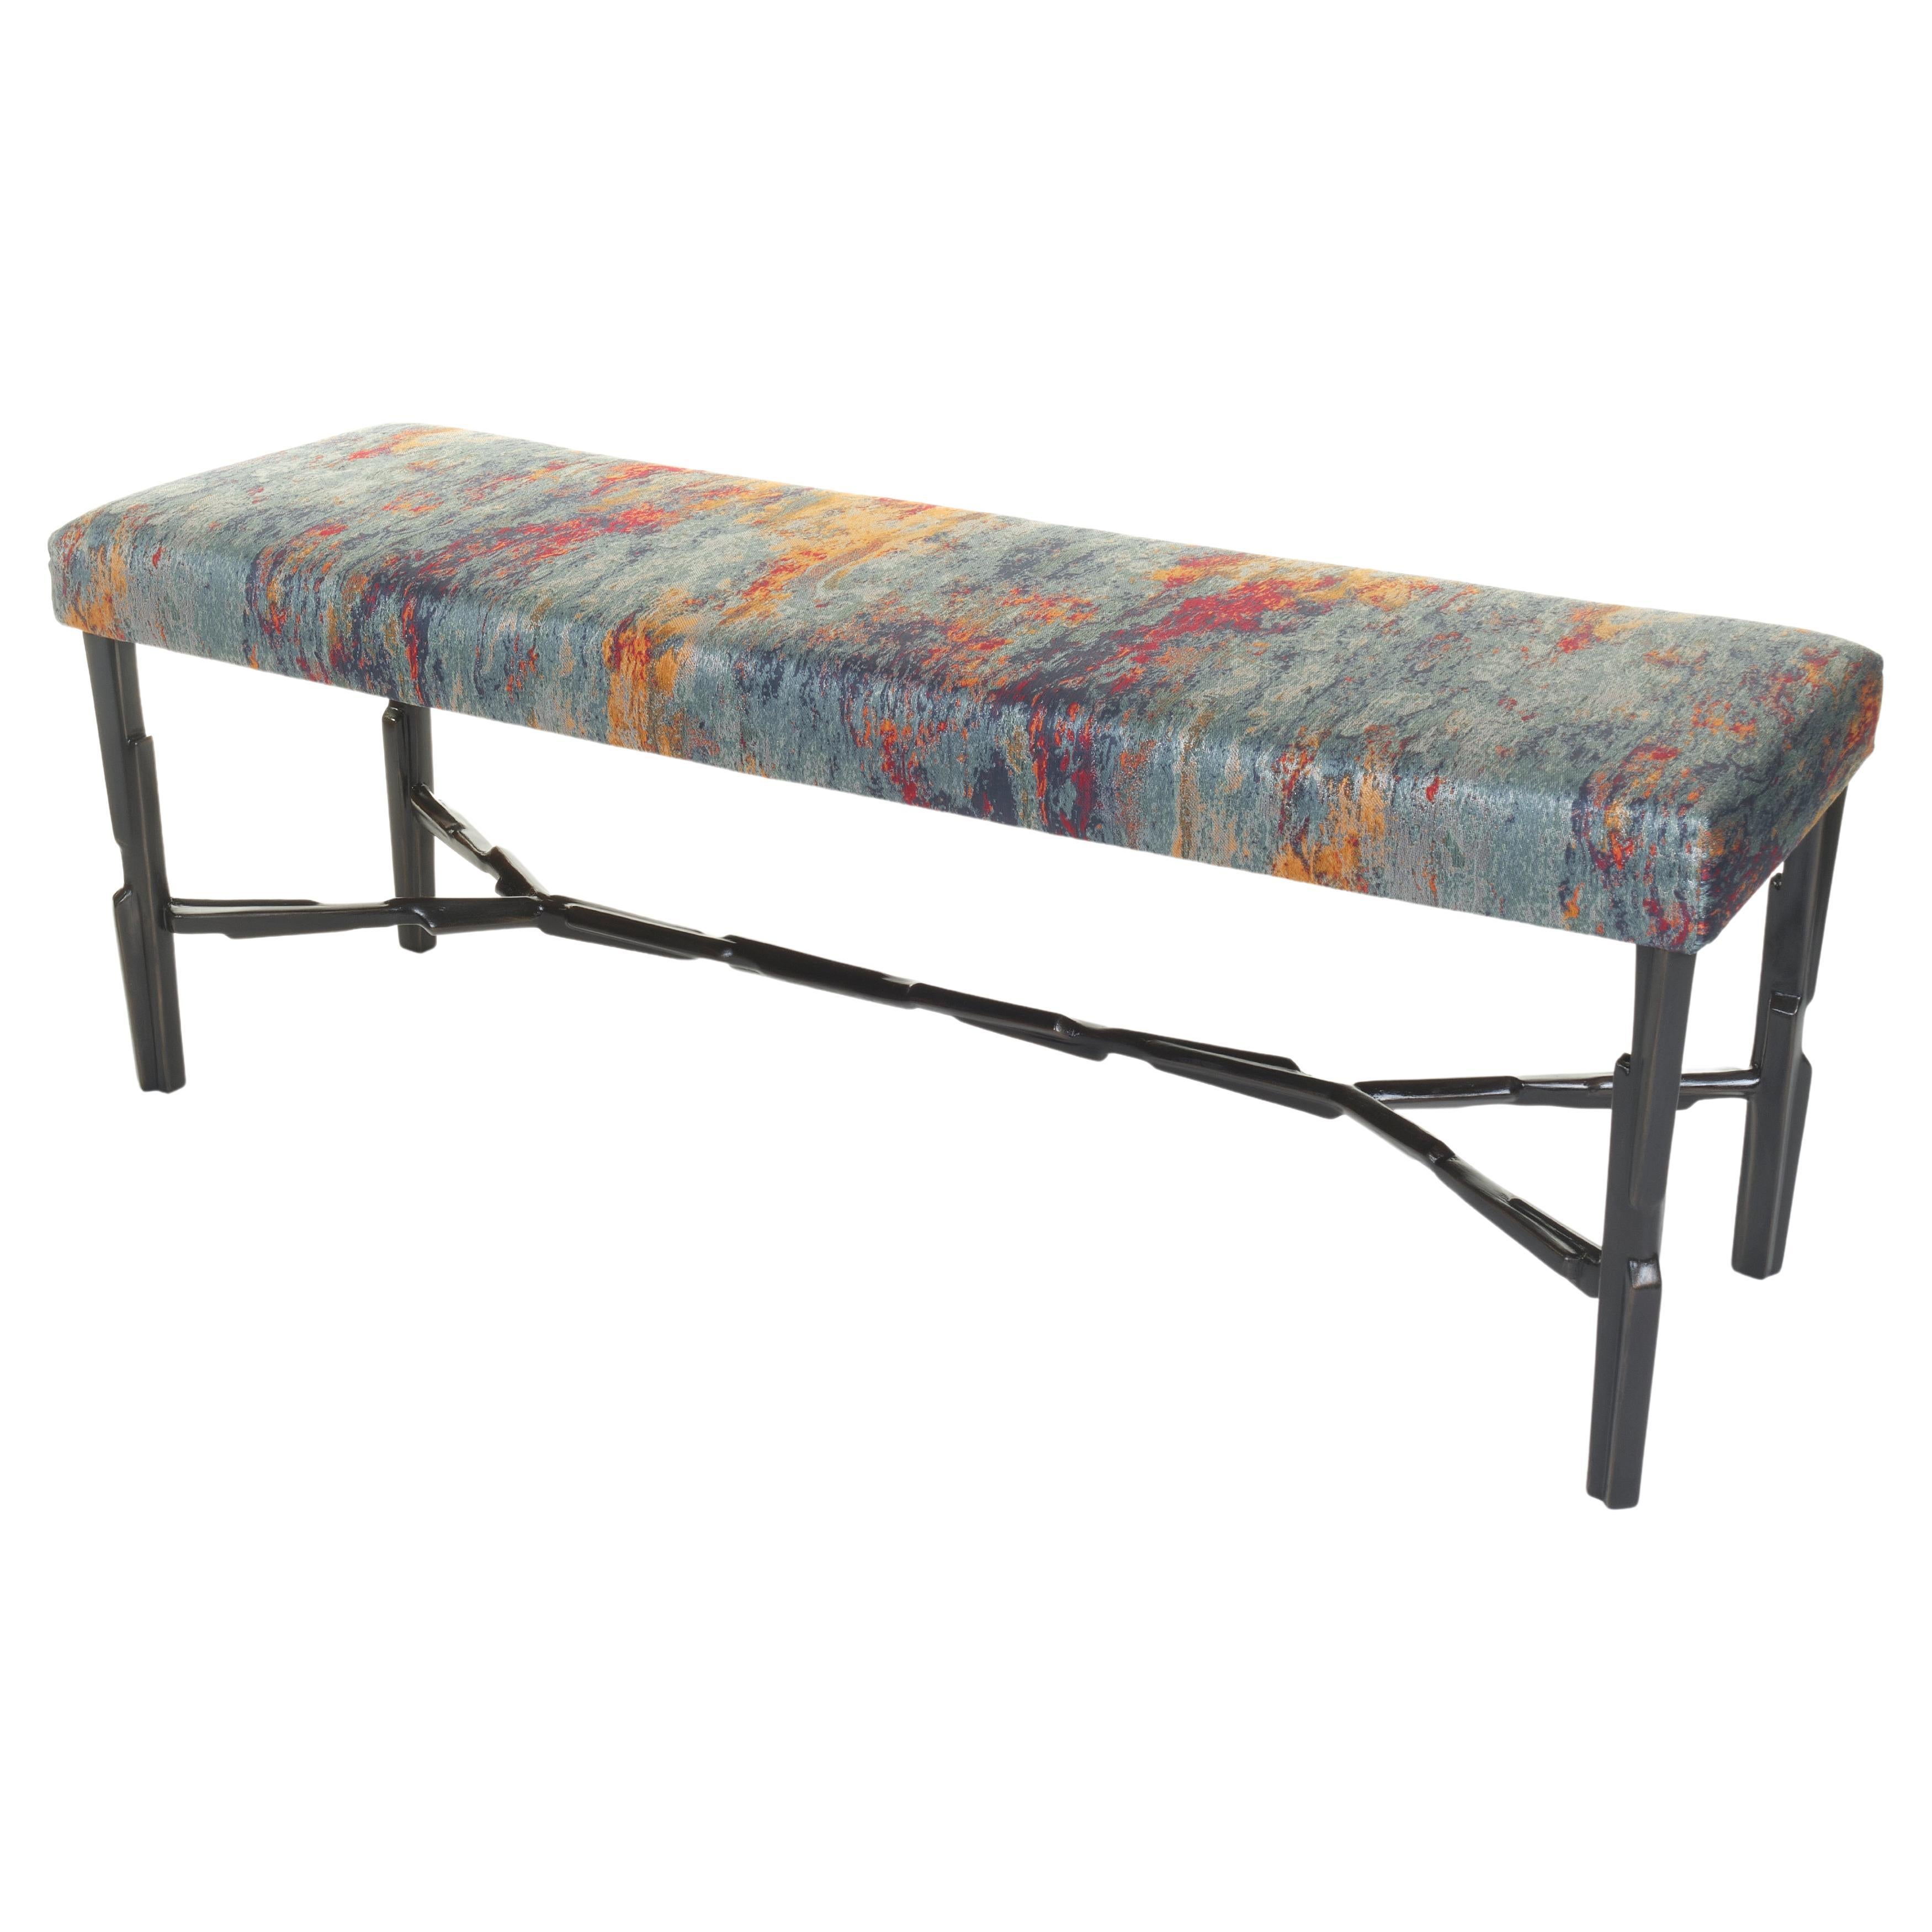 Modern Linea Bench No.2, Bronze Plaster Finish with Second Firing 1 seat pad For Sale